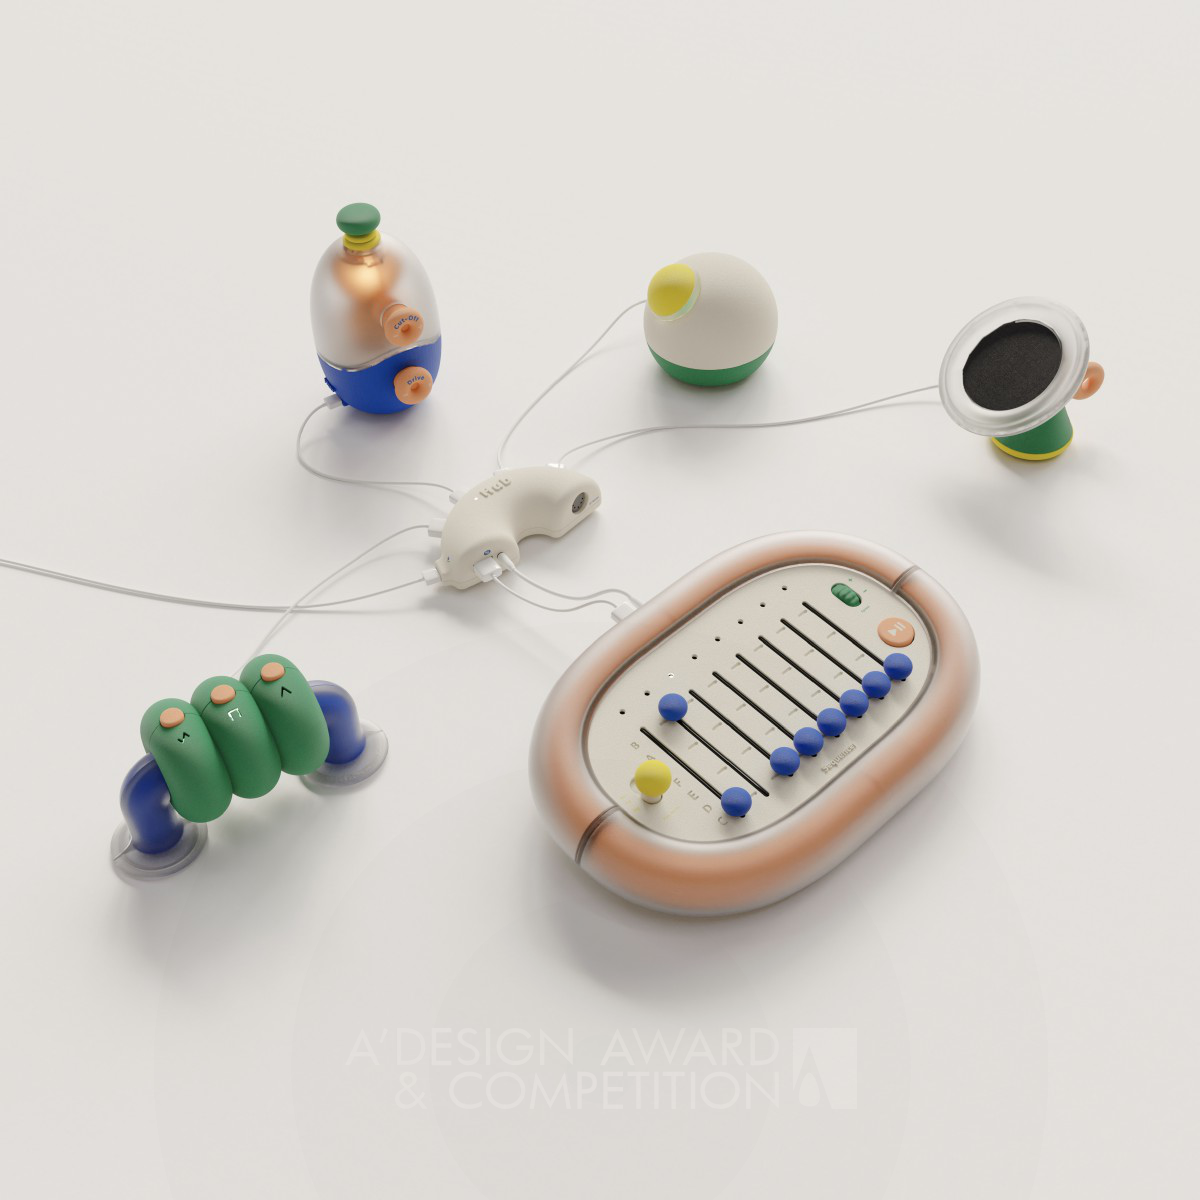 Dudo Synthetic Music Enlightenment Toys  by HSIN CHEN LIN